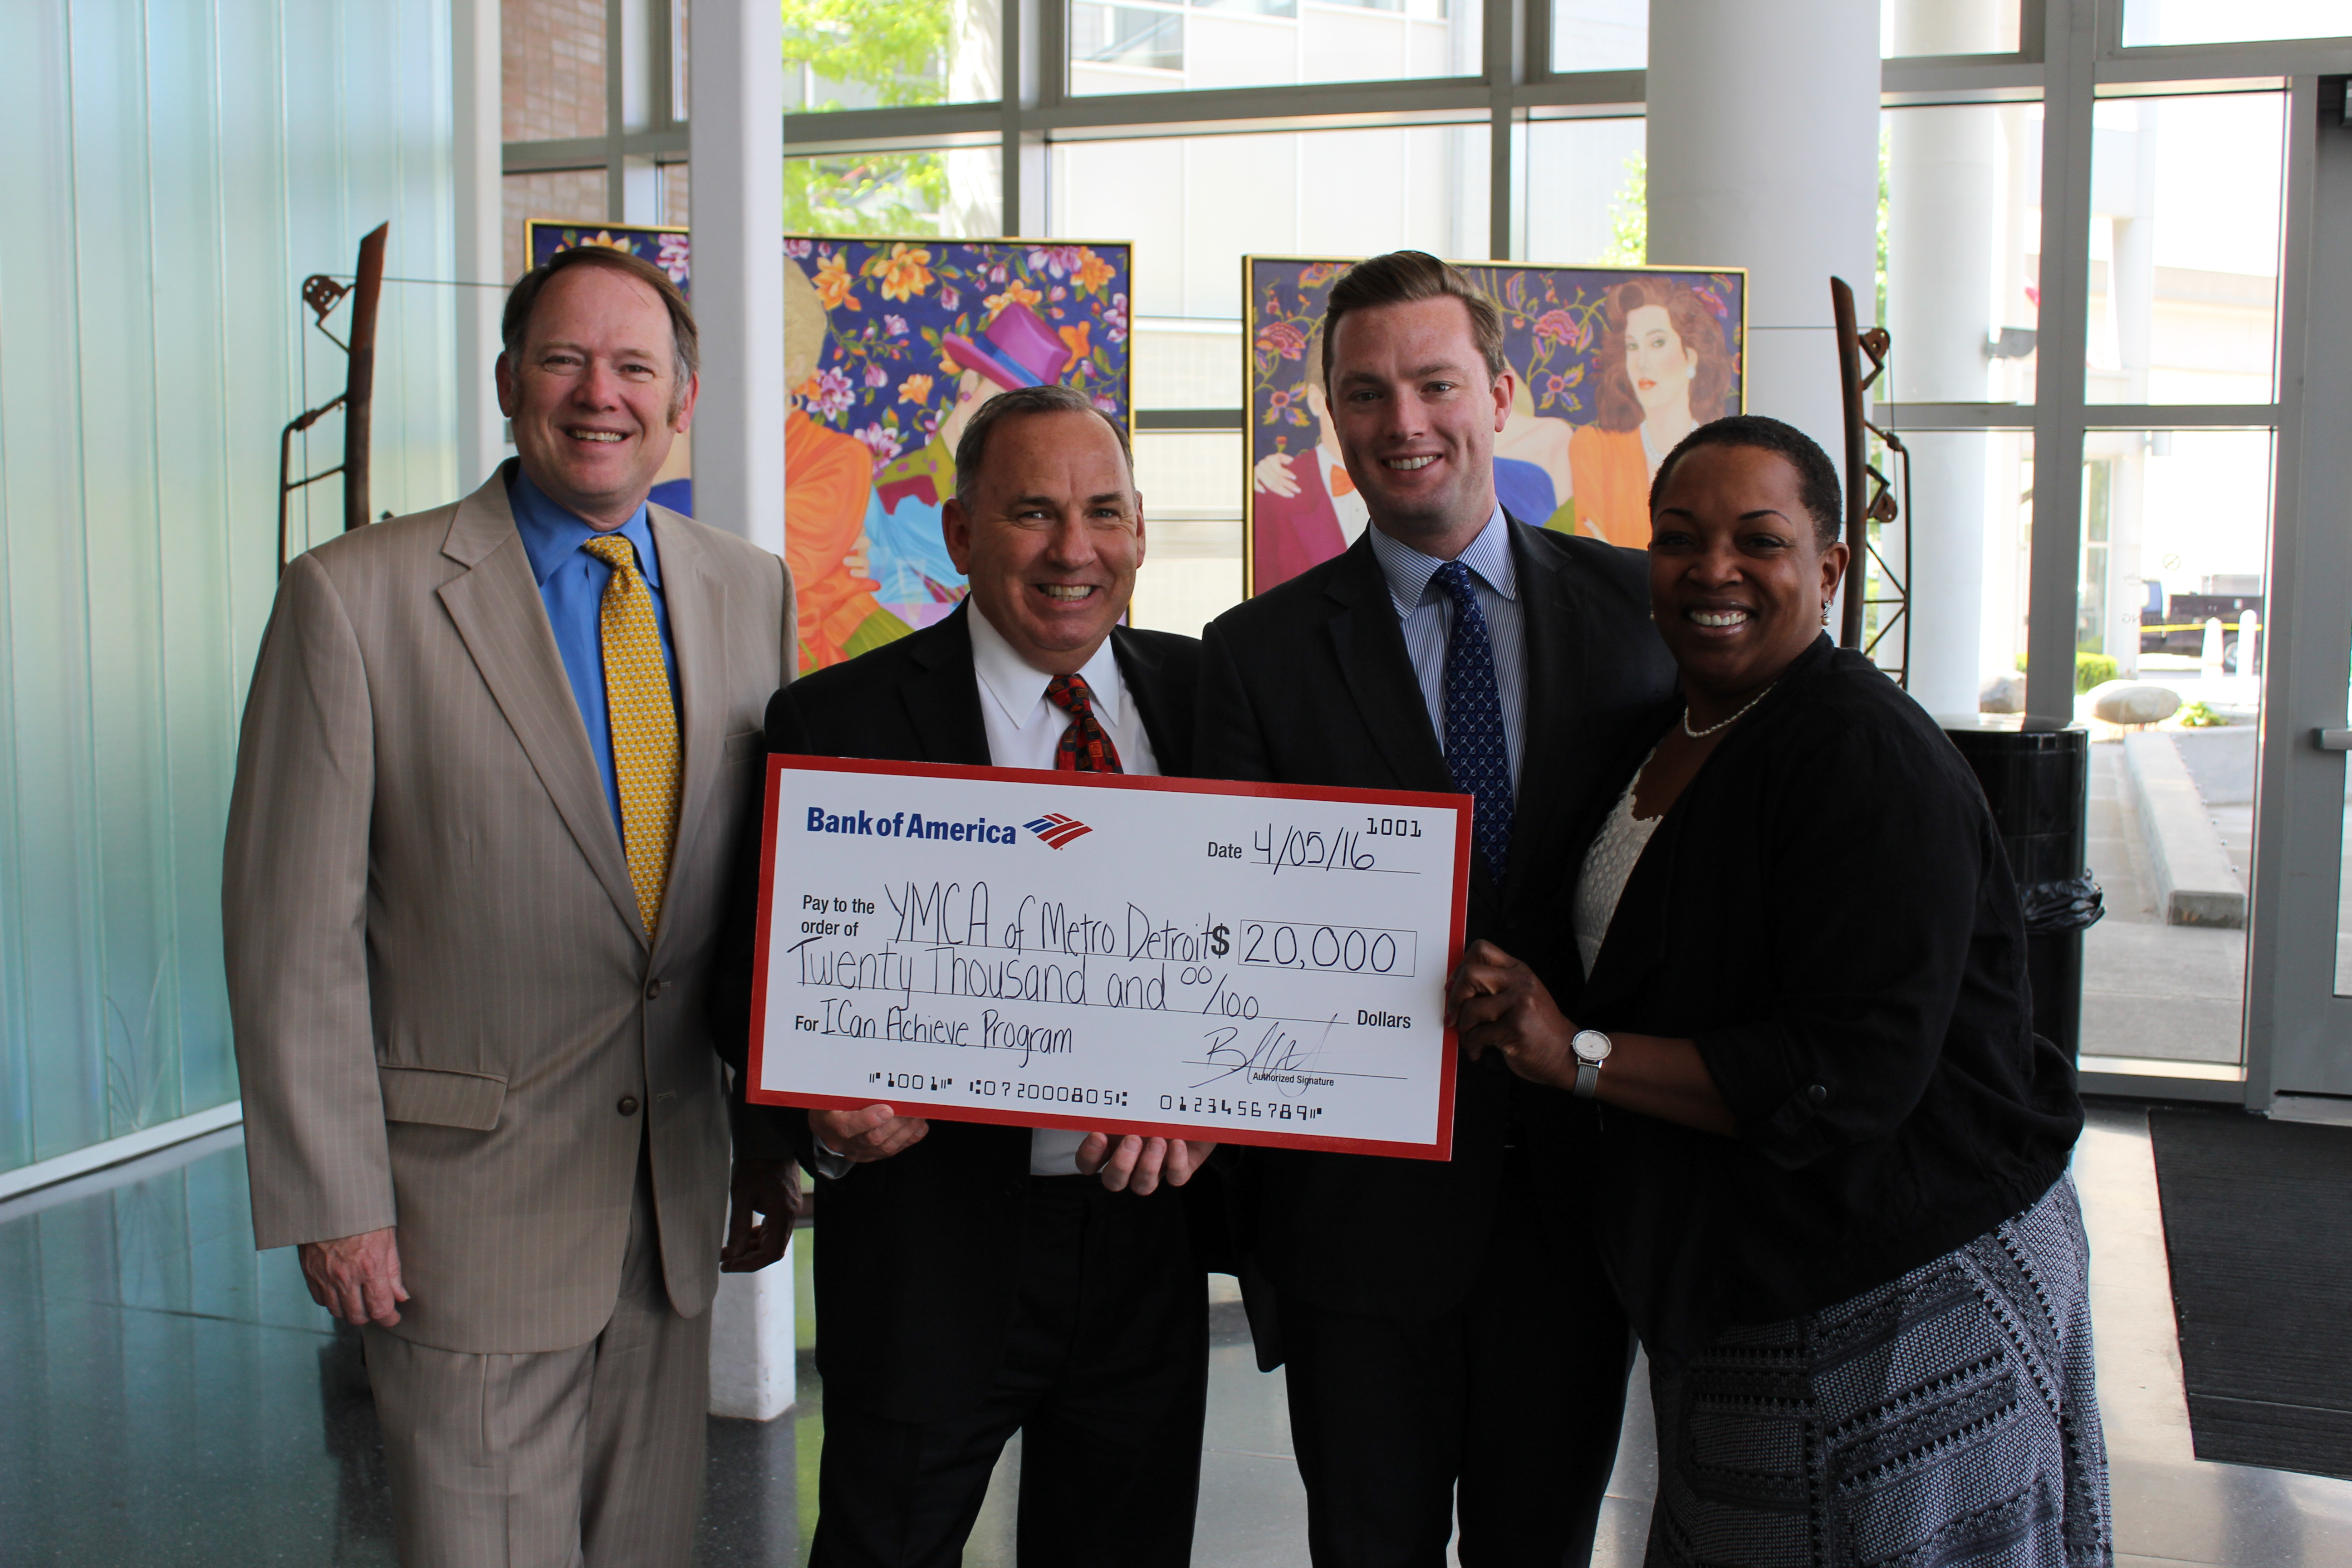 Bank of America donates $20,000 to support youth achievement in Metro Detroit